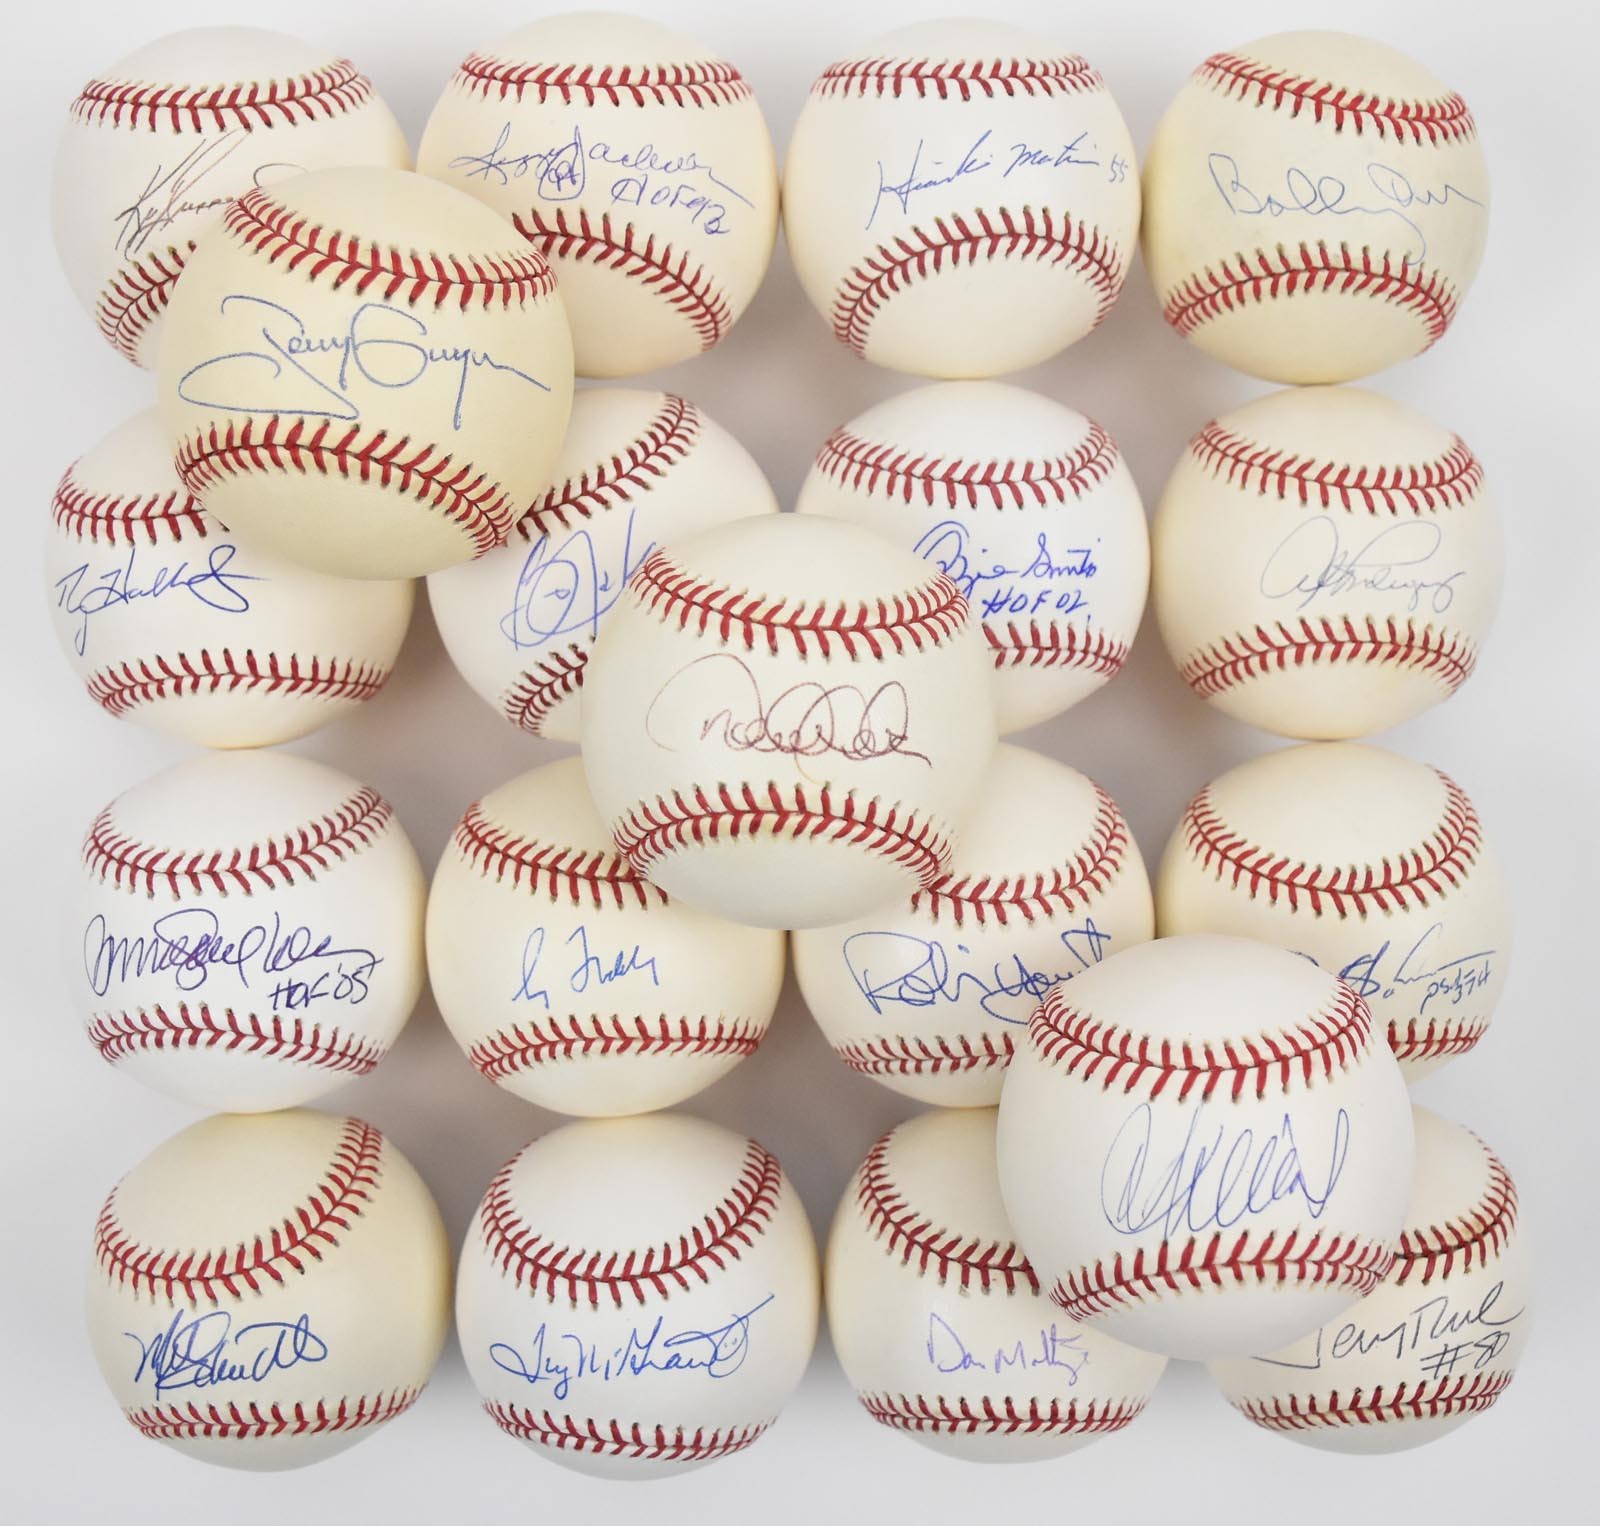 - Large Single Signed Baseball Collection with Many Hall of Famers - Jeter, Ichiro, Orr, Griffey Jr. (145+)